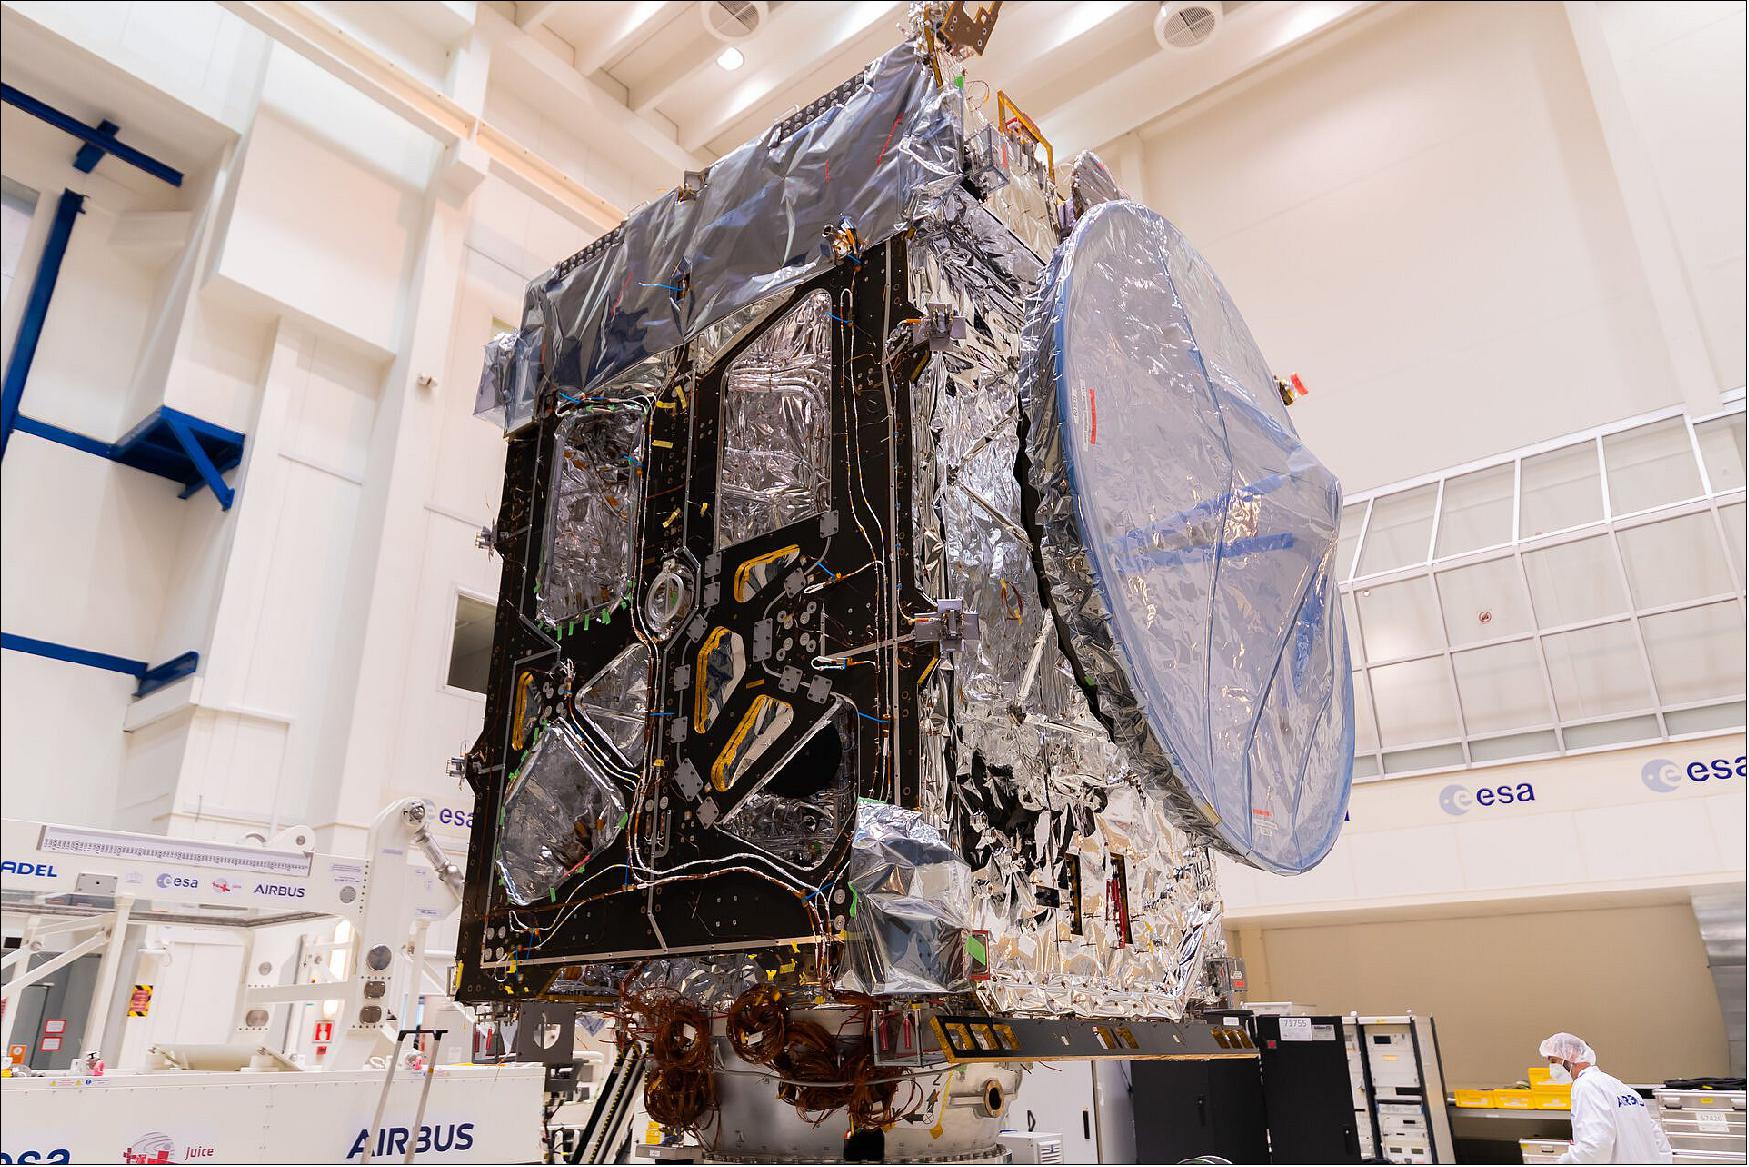 Figure 14: ESA's JUICE satellite being installed on a ‘multi-purpose trolley' in the Rosetta clean room at ESTEC in the Netherlands on 30 April. The multi-purpose trolley allows the spacecraft to be rotated and titled, providing better access to the engineers for integration operations and preparation for testing, and in general to facilitate the work on the different sides of the spacecraft. The trolley is made of non-magnetic material, to comply to the strict magnetic cleanliness requirements of the spacecraft (image credit: ESA-SJM Photography)